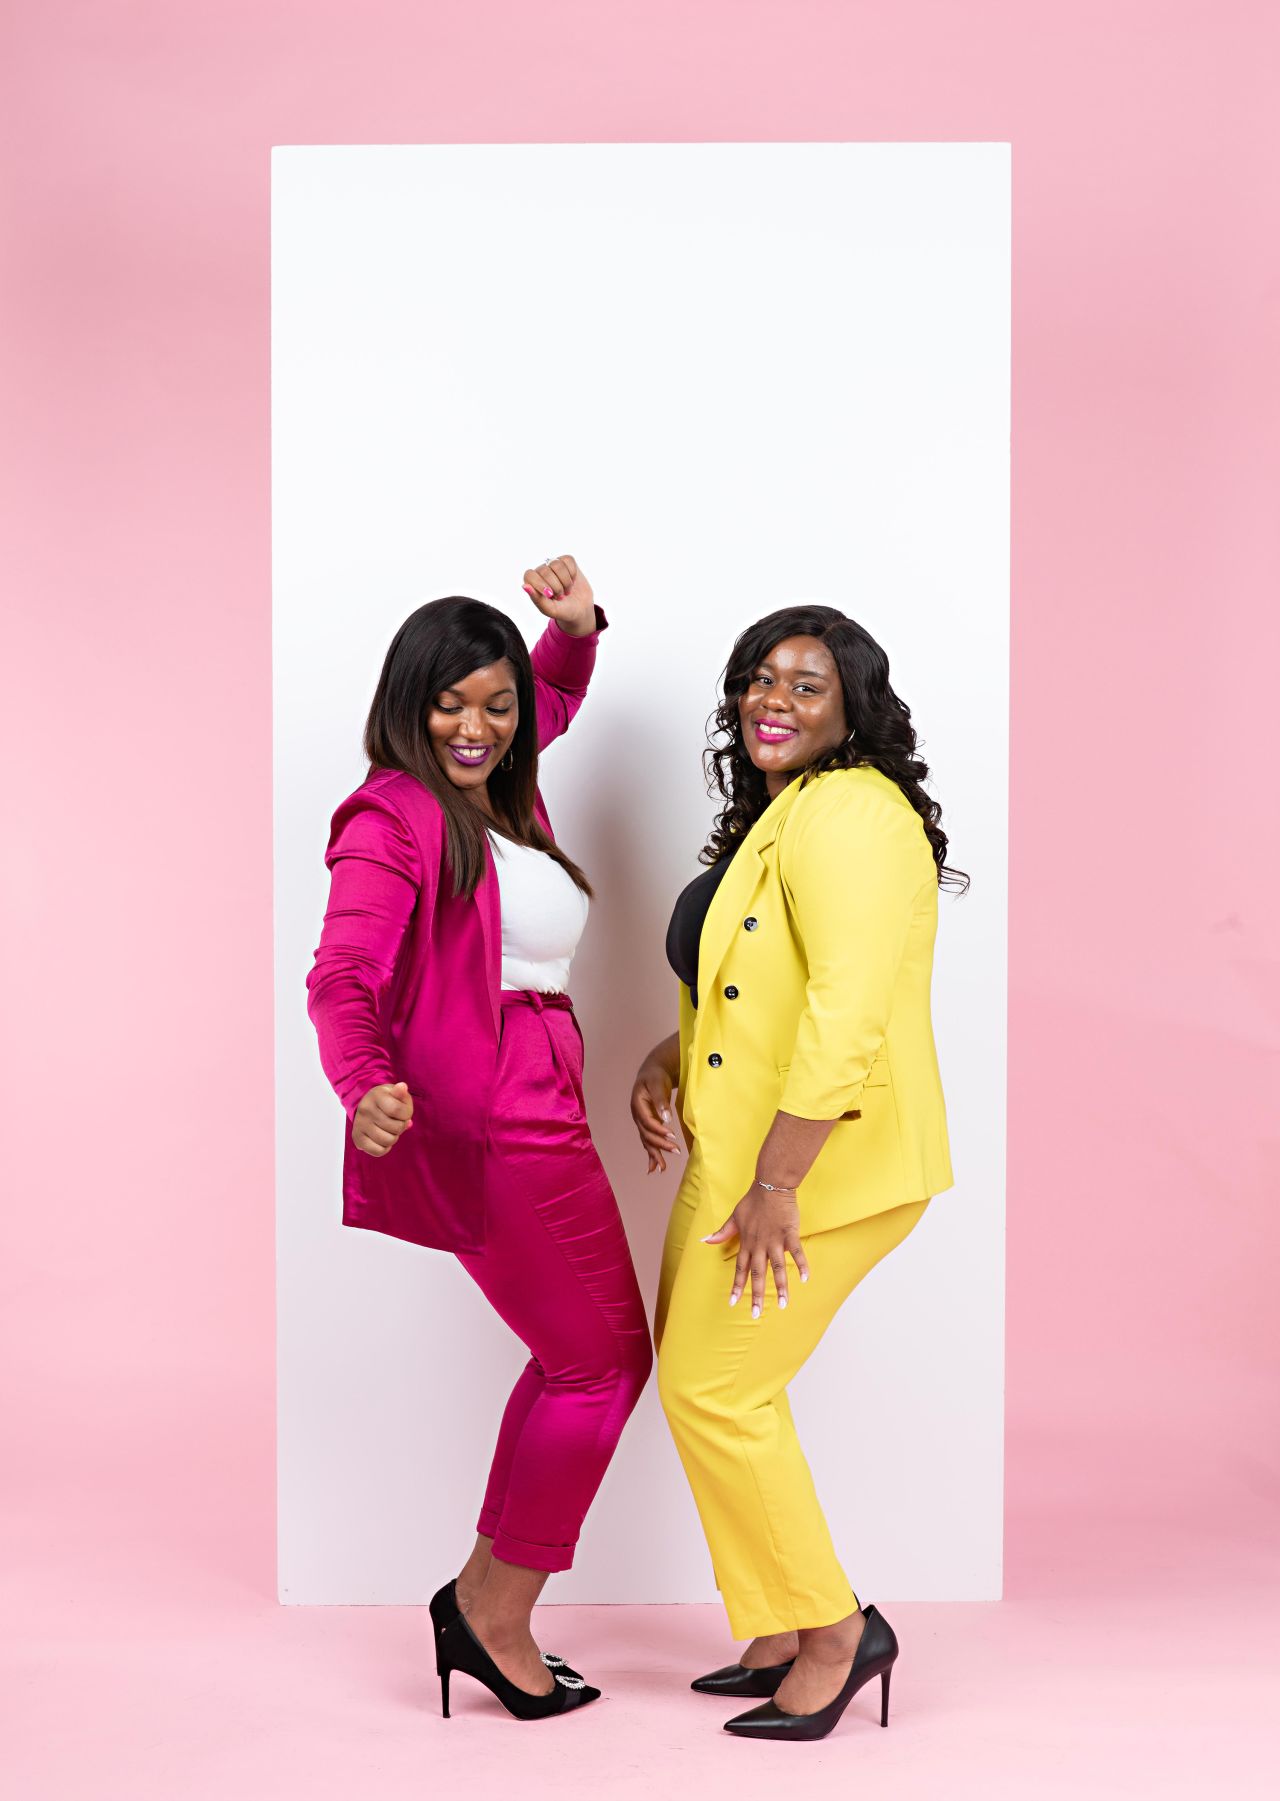 Esther and Alicia co-founded non-profit organization Fight Through Flights in 2020.